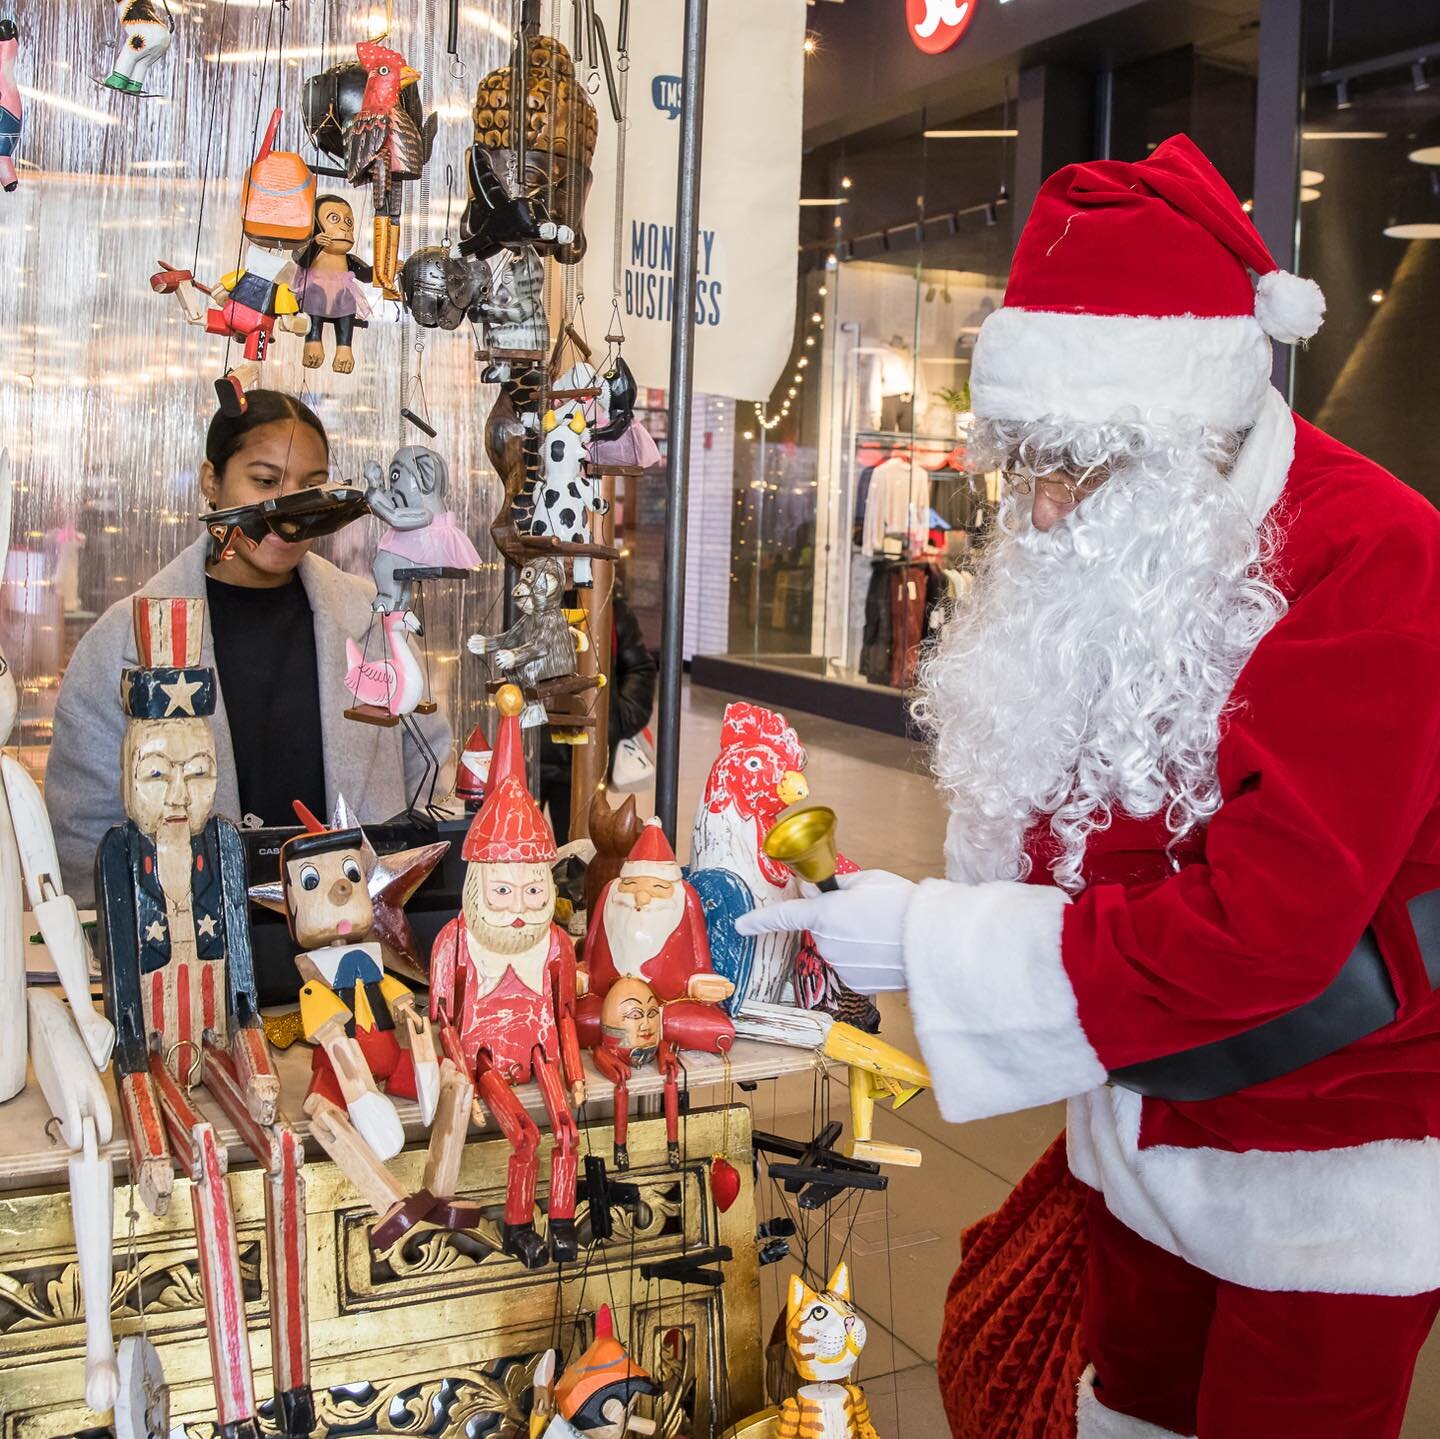 We are SO excited to welcome the jolliest dude in town, the big guy in red, the one and only SANTA is coming to @citypointbklyn! 🎅👏👏👏👏👏

Join us for the perfect photo op moment and discover handmade gifts, accessories and home decor items by ou